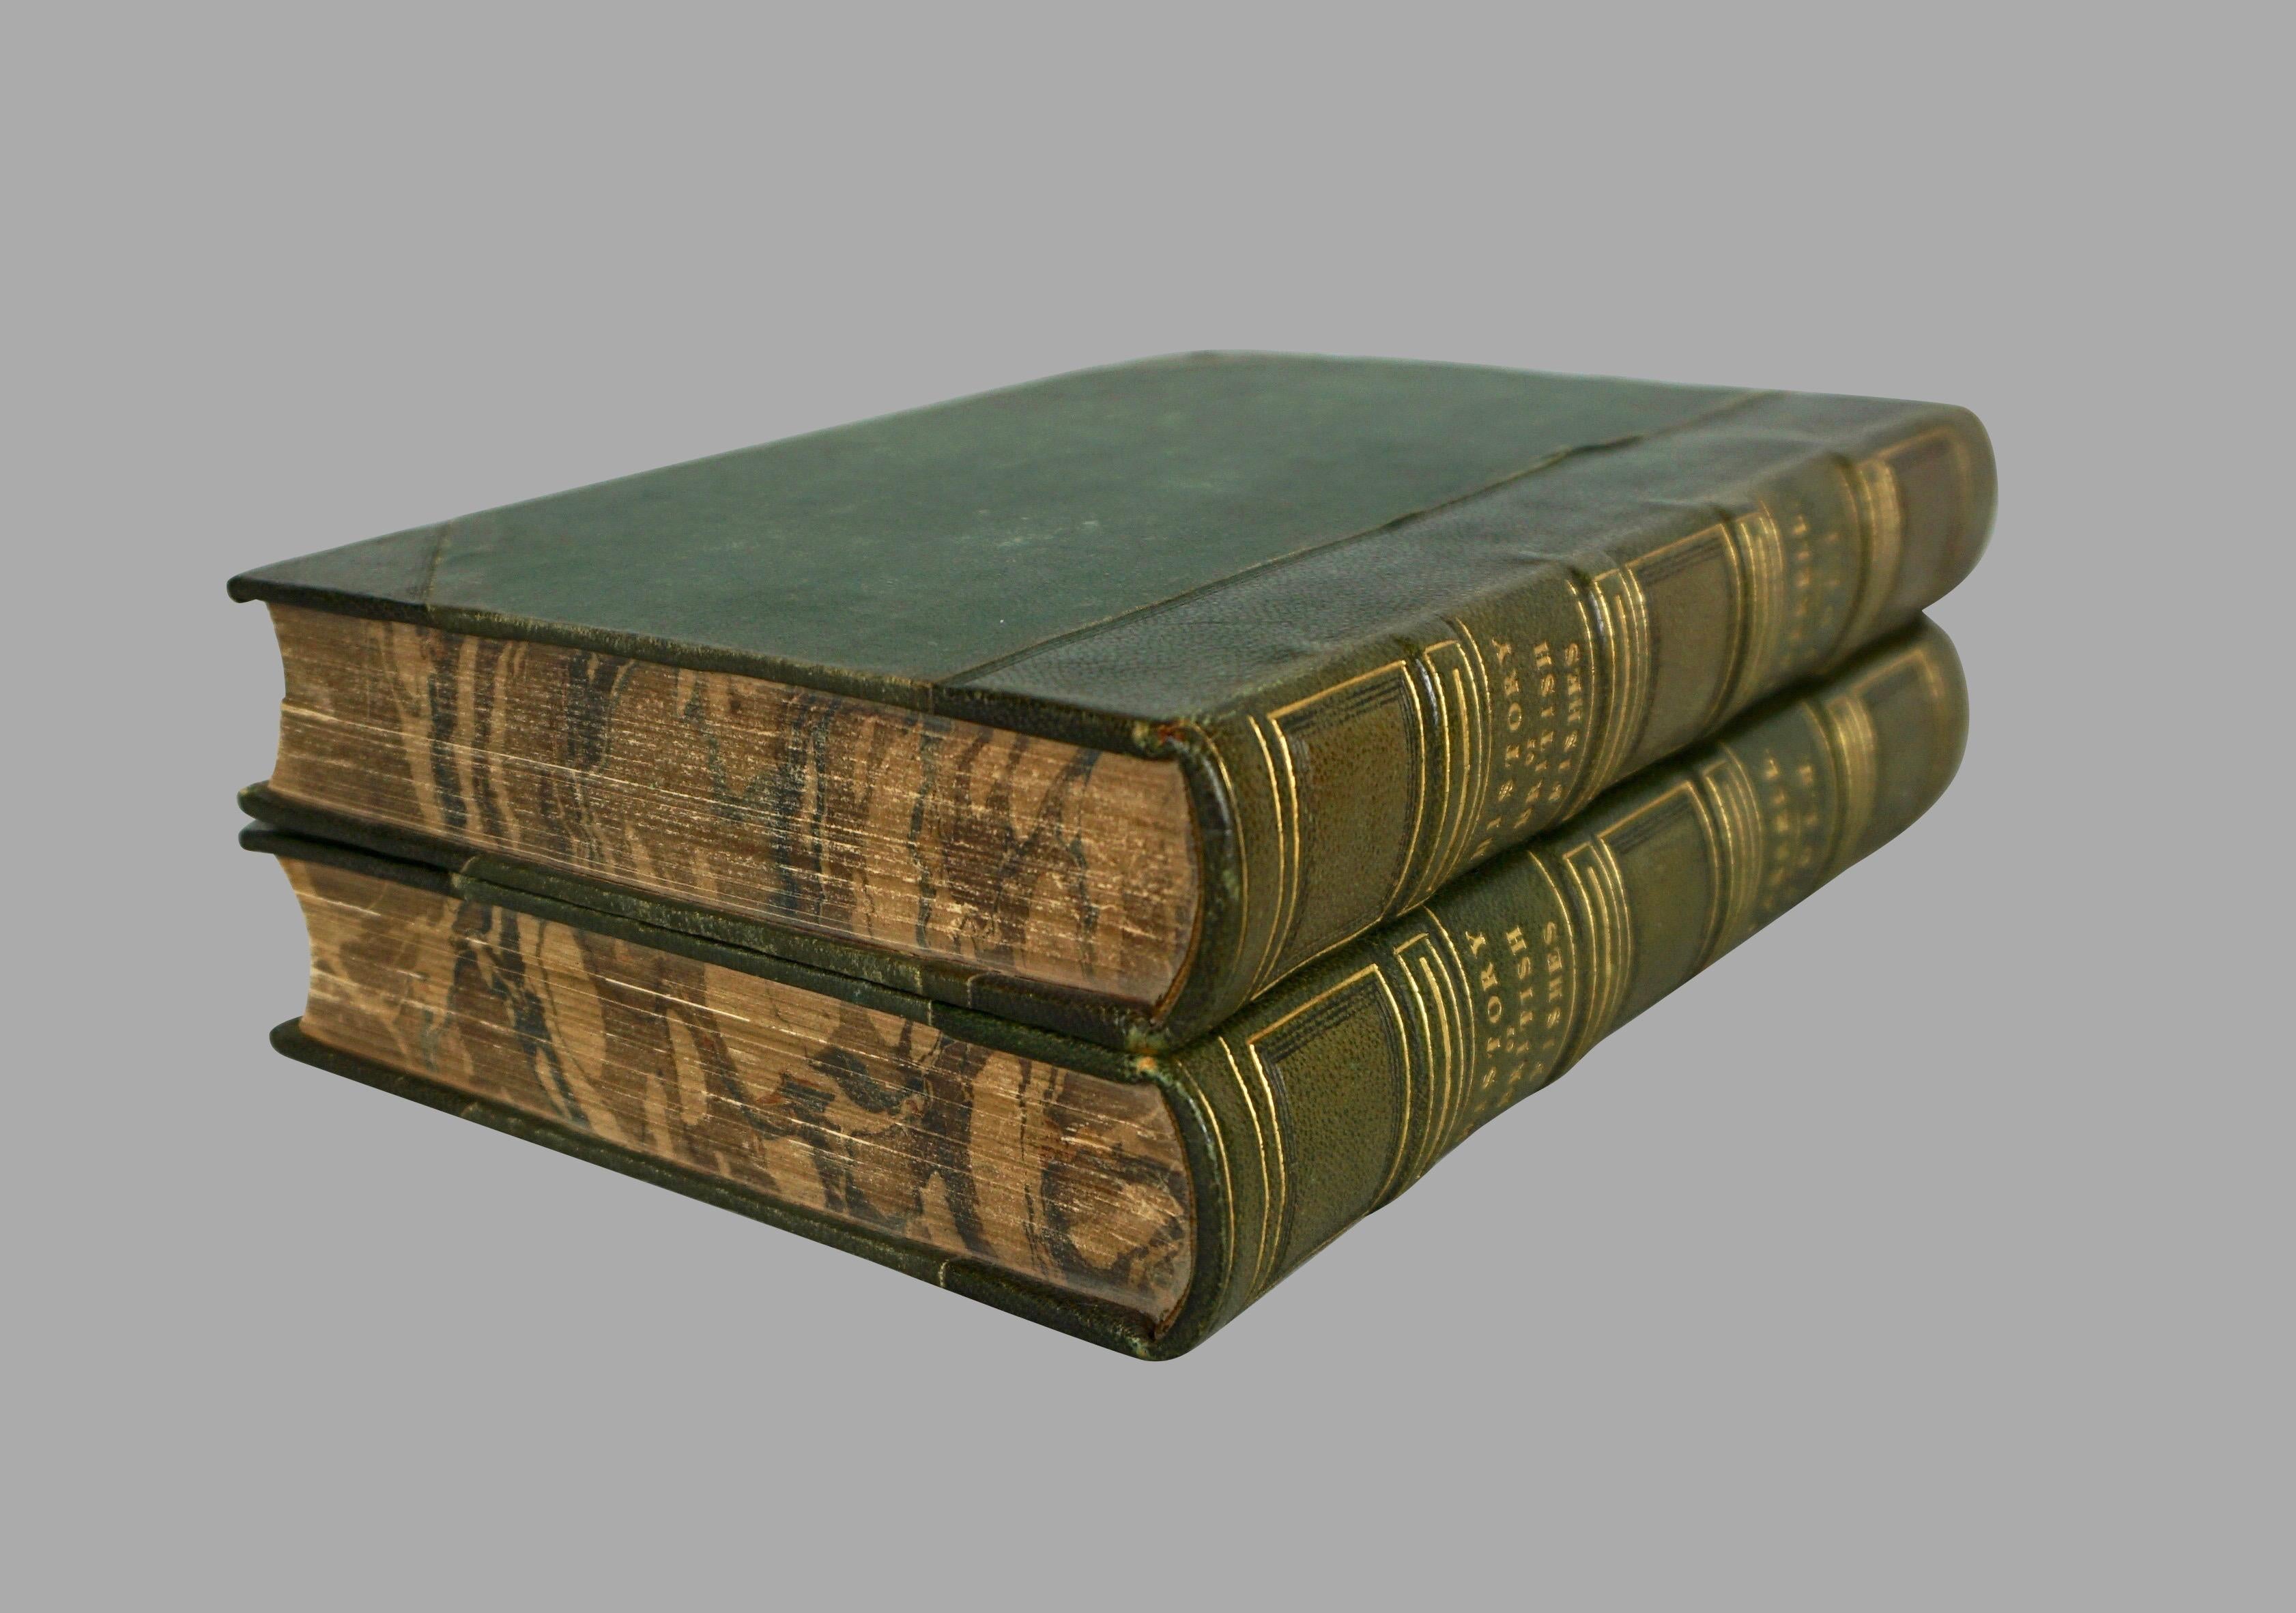 English First Edition: History of British Fishes by Yarrell Leather Bound in 2 Volumes